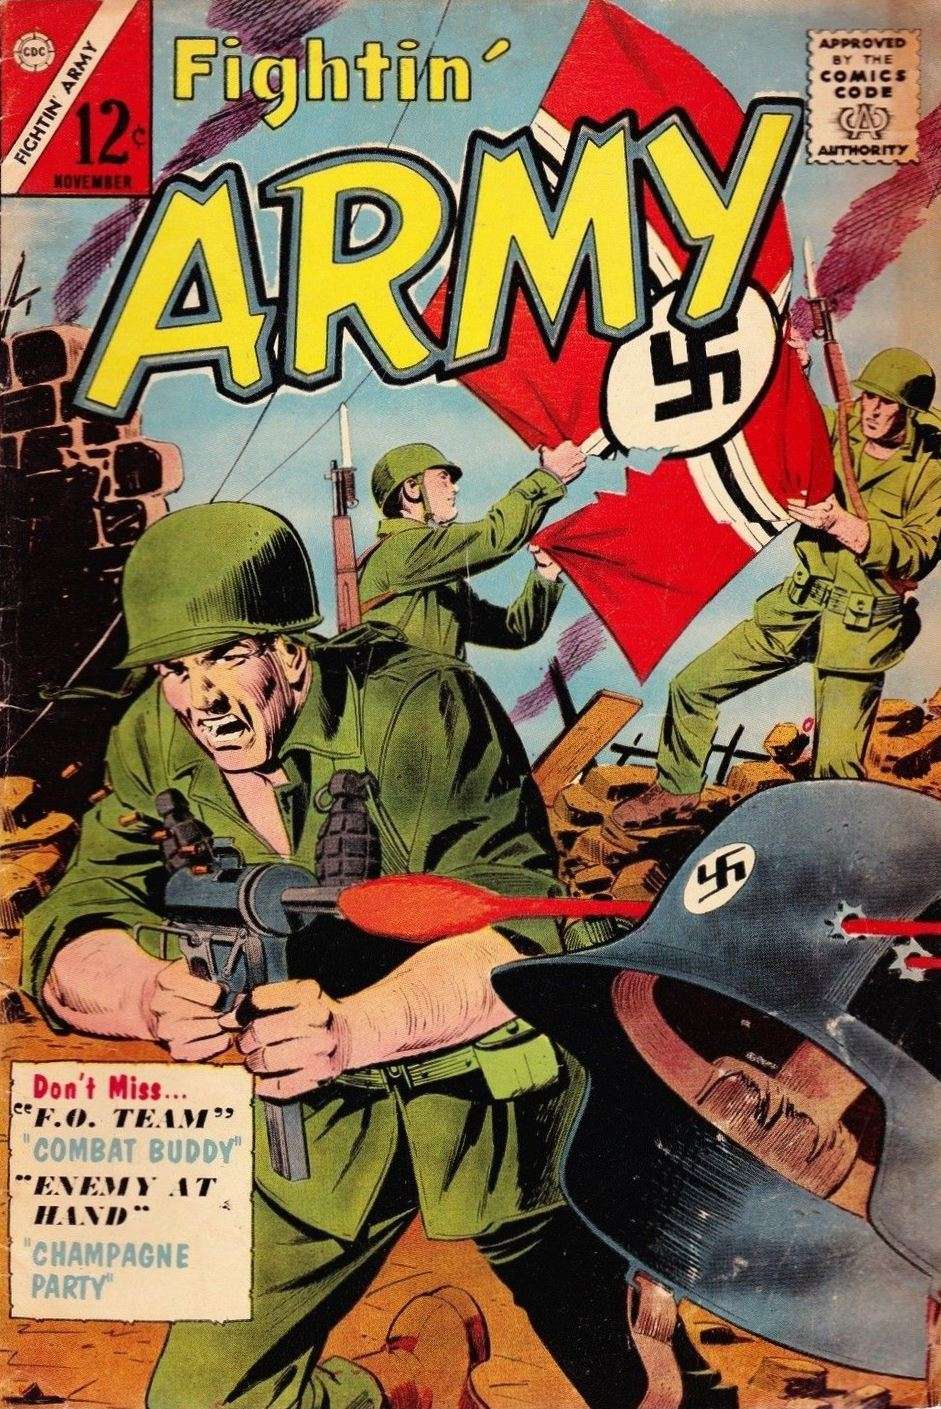 Book Cover For Fightin' Army 60